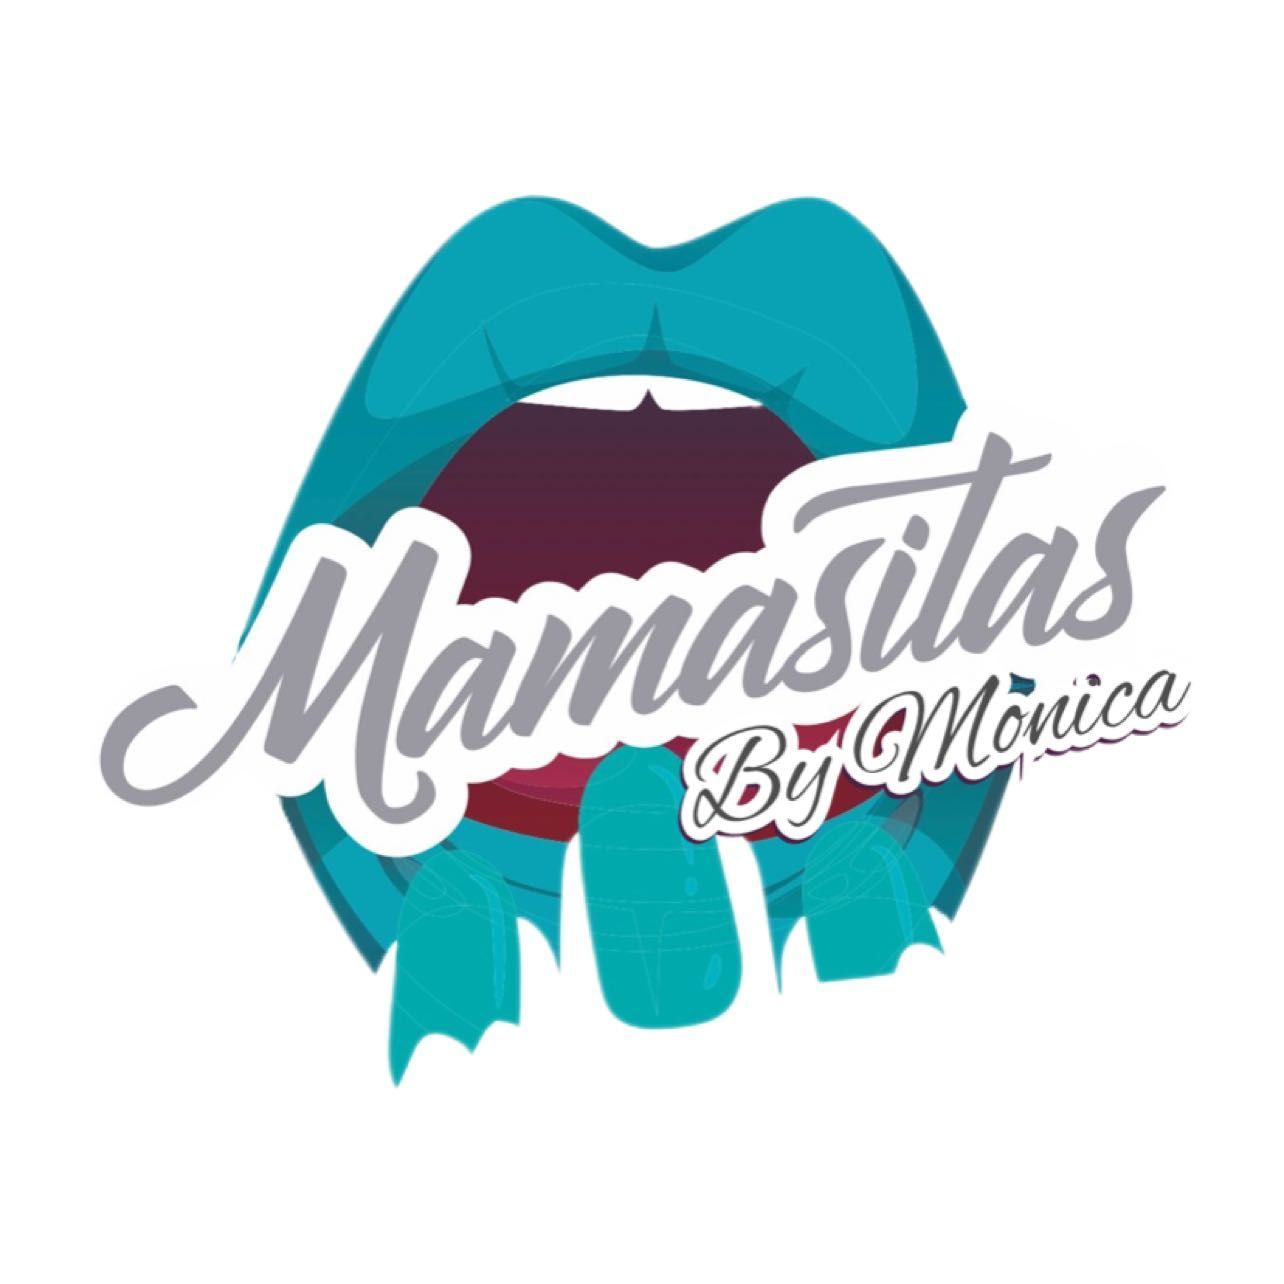 Mamasitas Nails By Monica, 458 21st Ave, Paterson, 07513